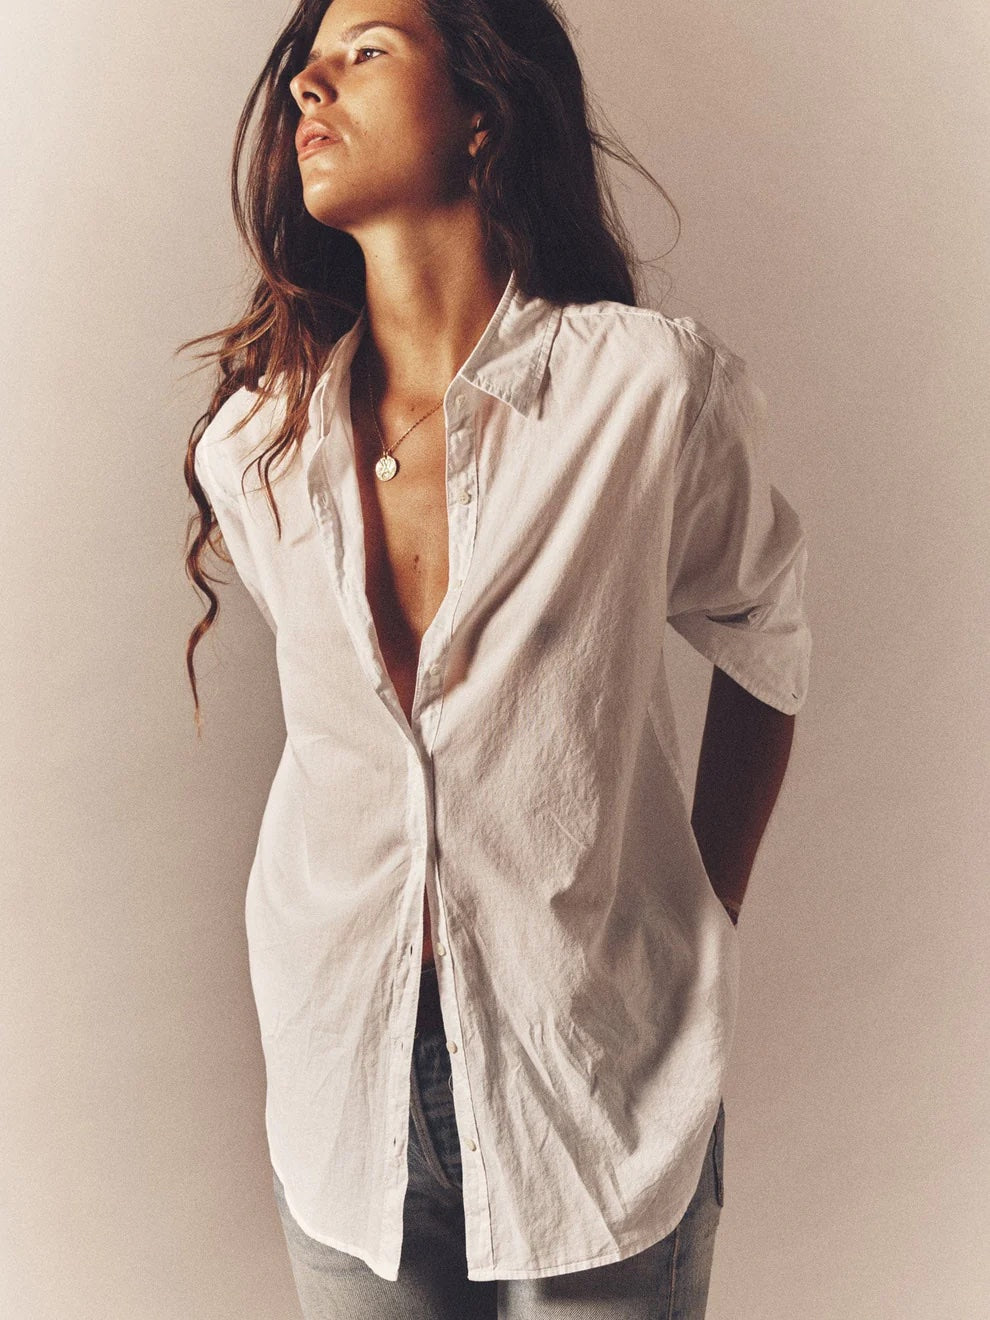 Xírena Beau Shirt in White available at The New Trend